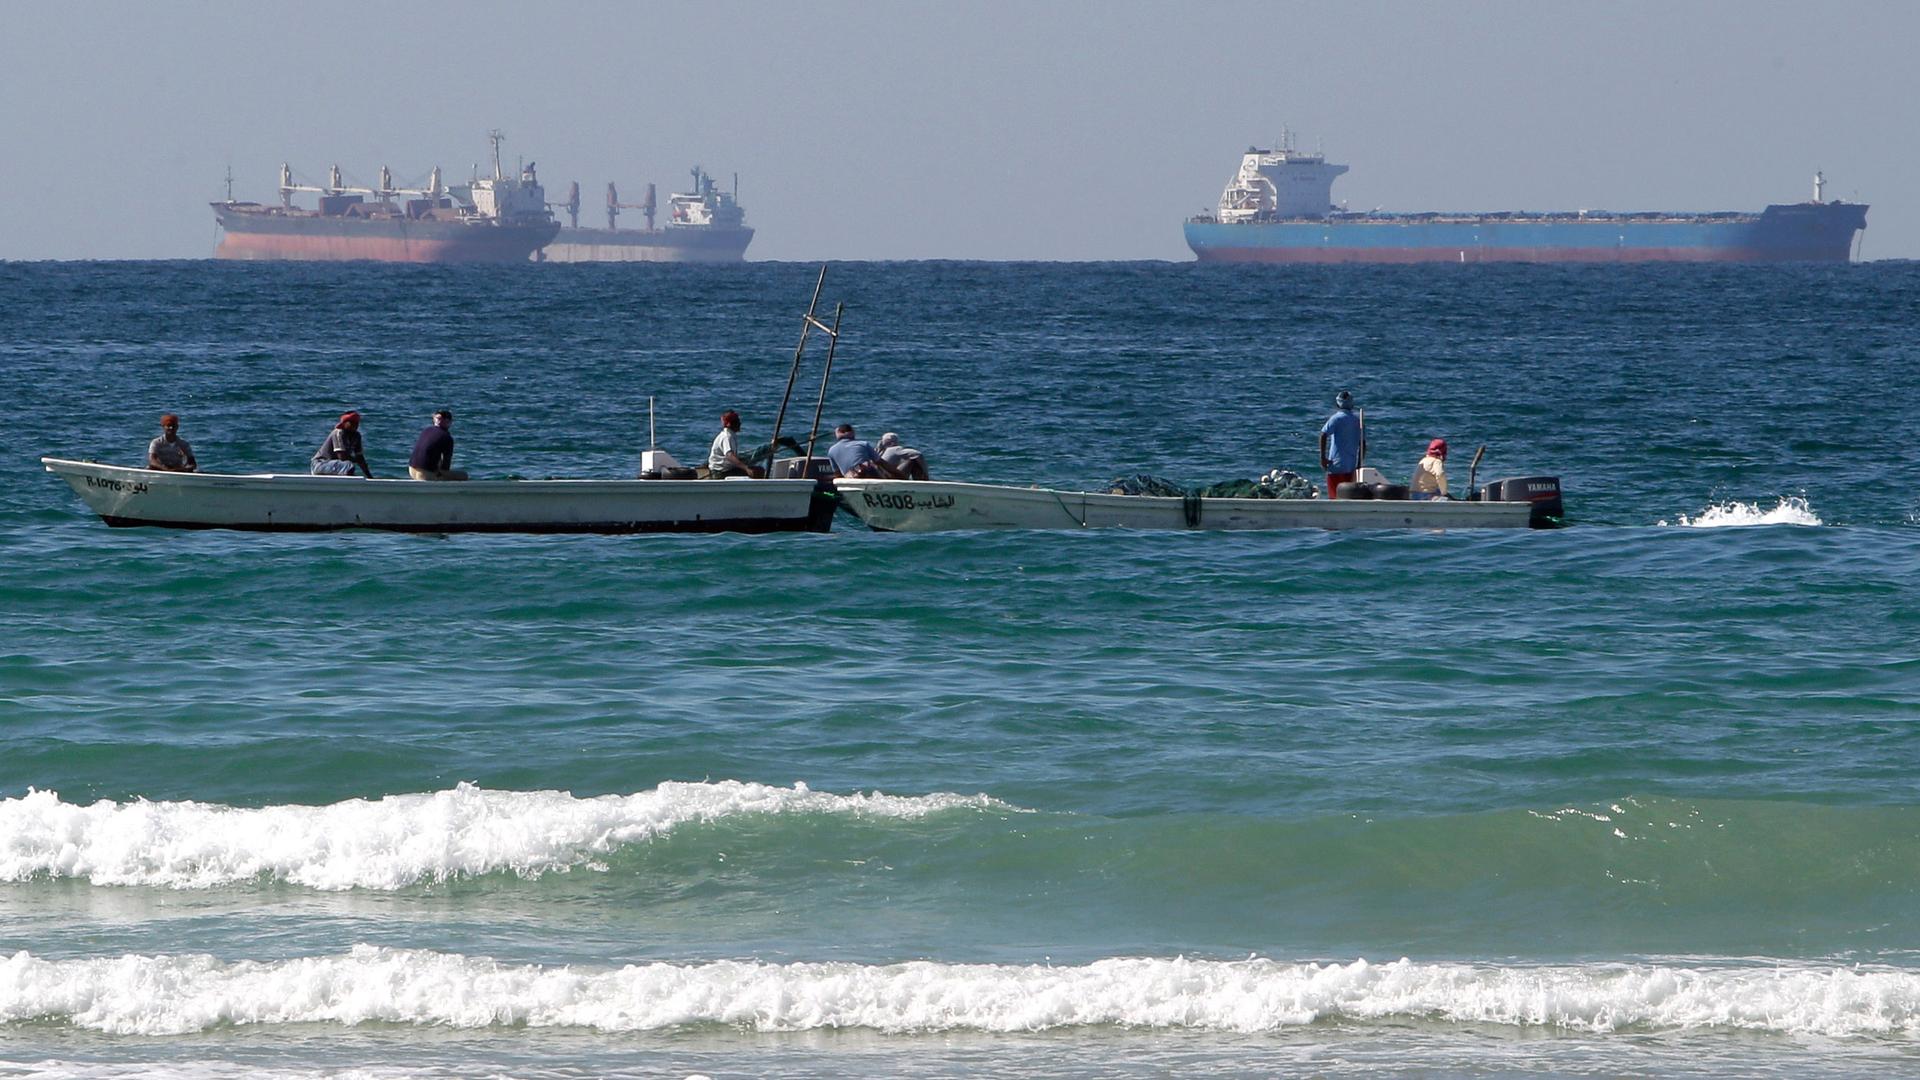 Two small fishing boats are shown in the near ground with large oil tankers off in the distance.